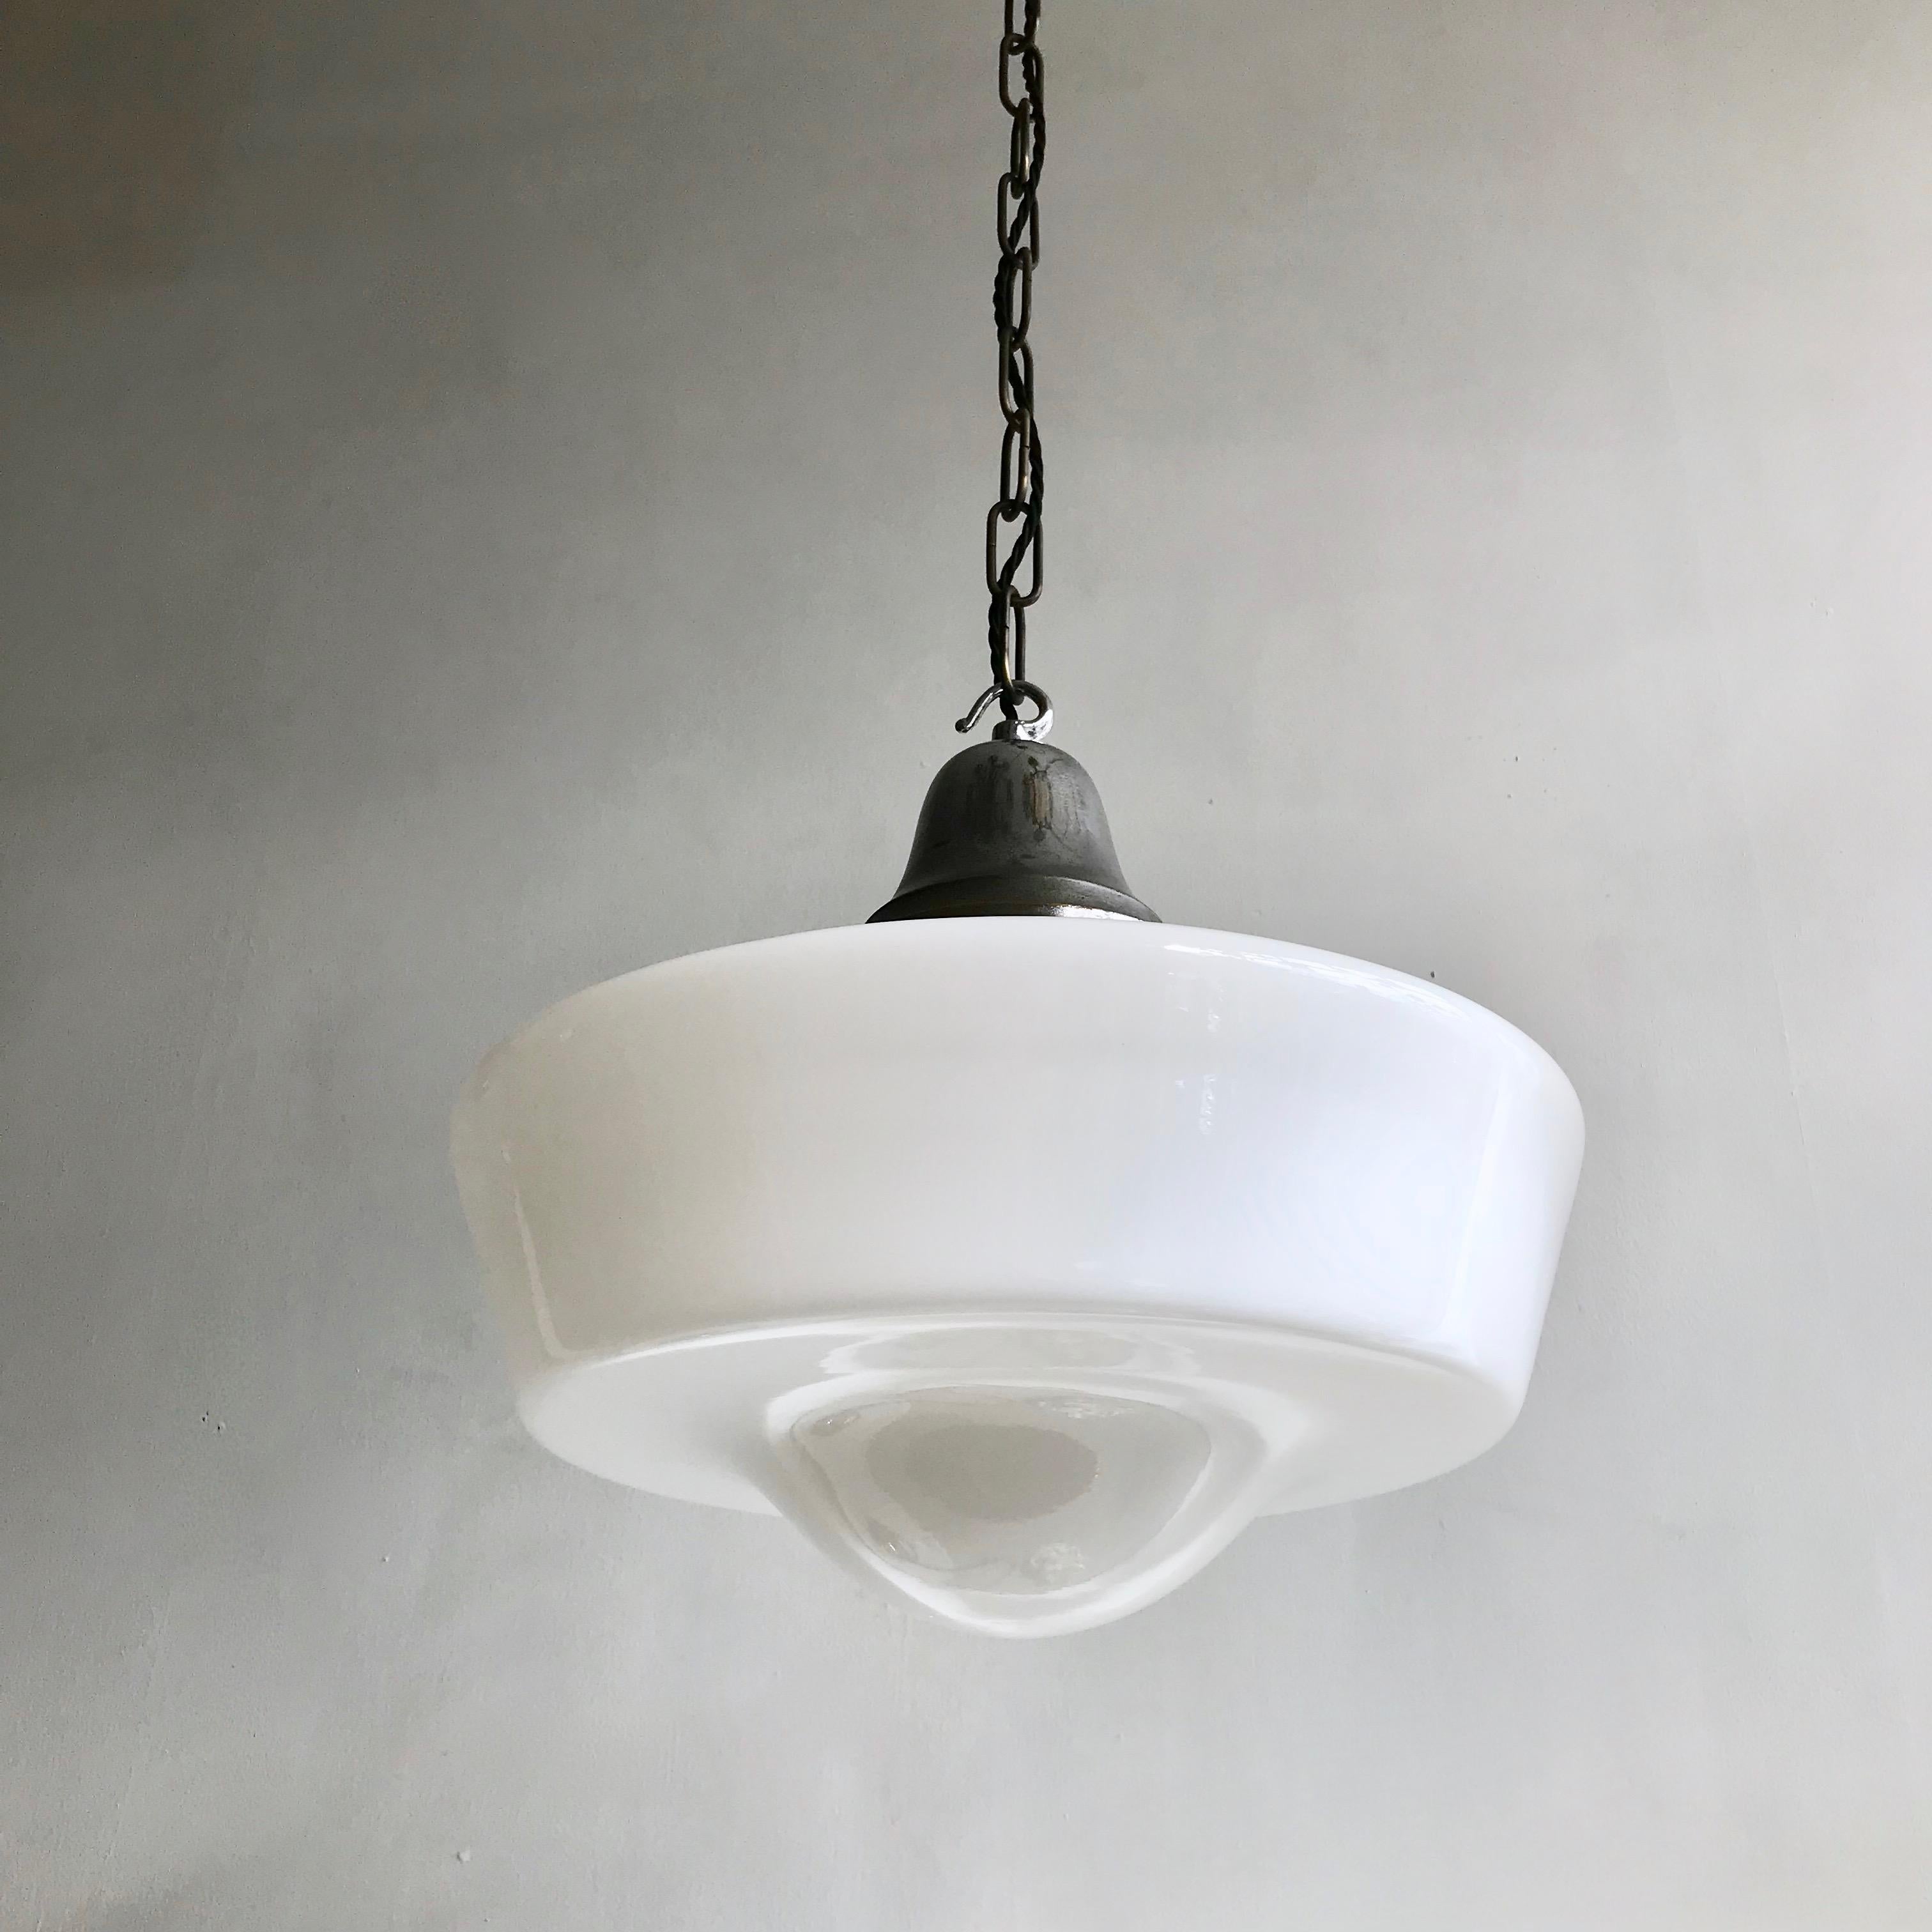 Original deco school house shade, opaline glass with an antique chromed gallery. The chrome on the gallery is pitted and worn adding to the antique look of this piece. It is wired with a B22 lamp holder and supplied with braided flex, chain and a